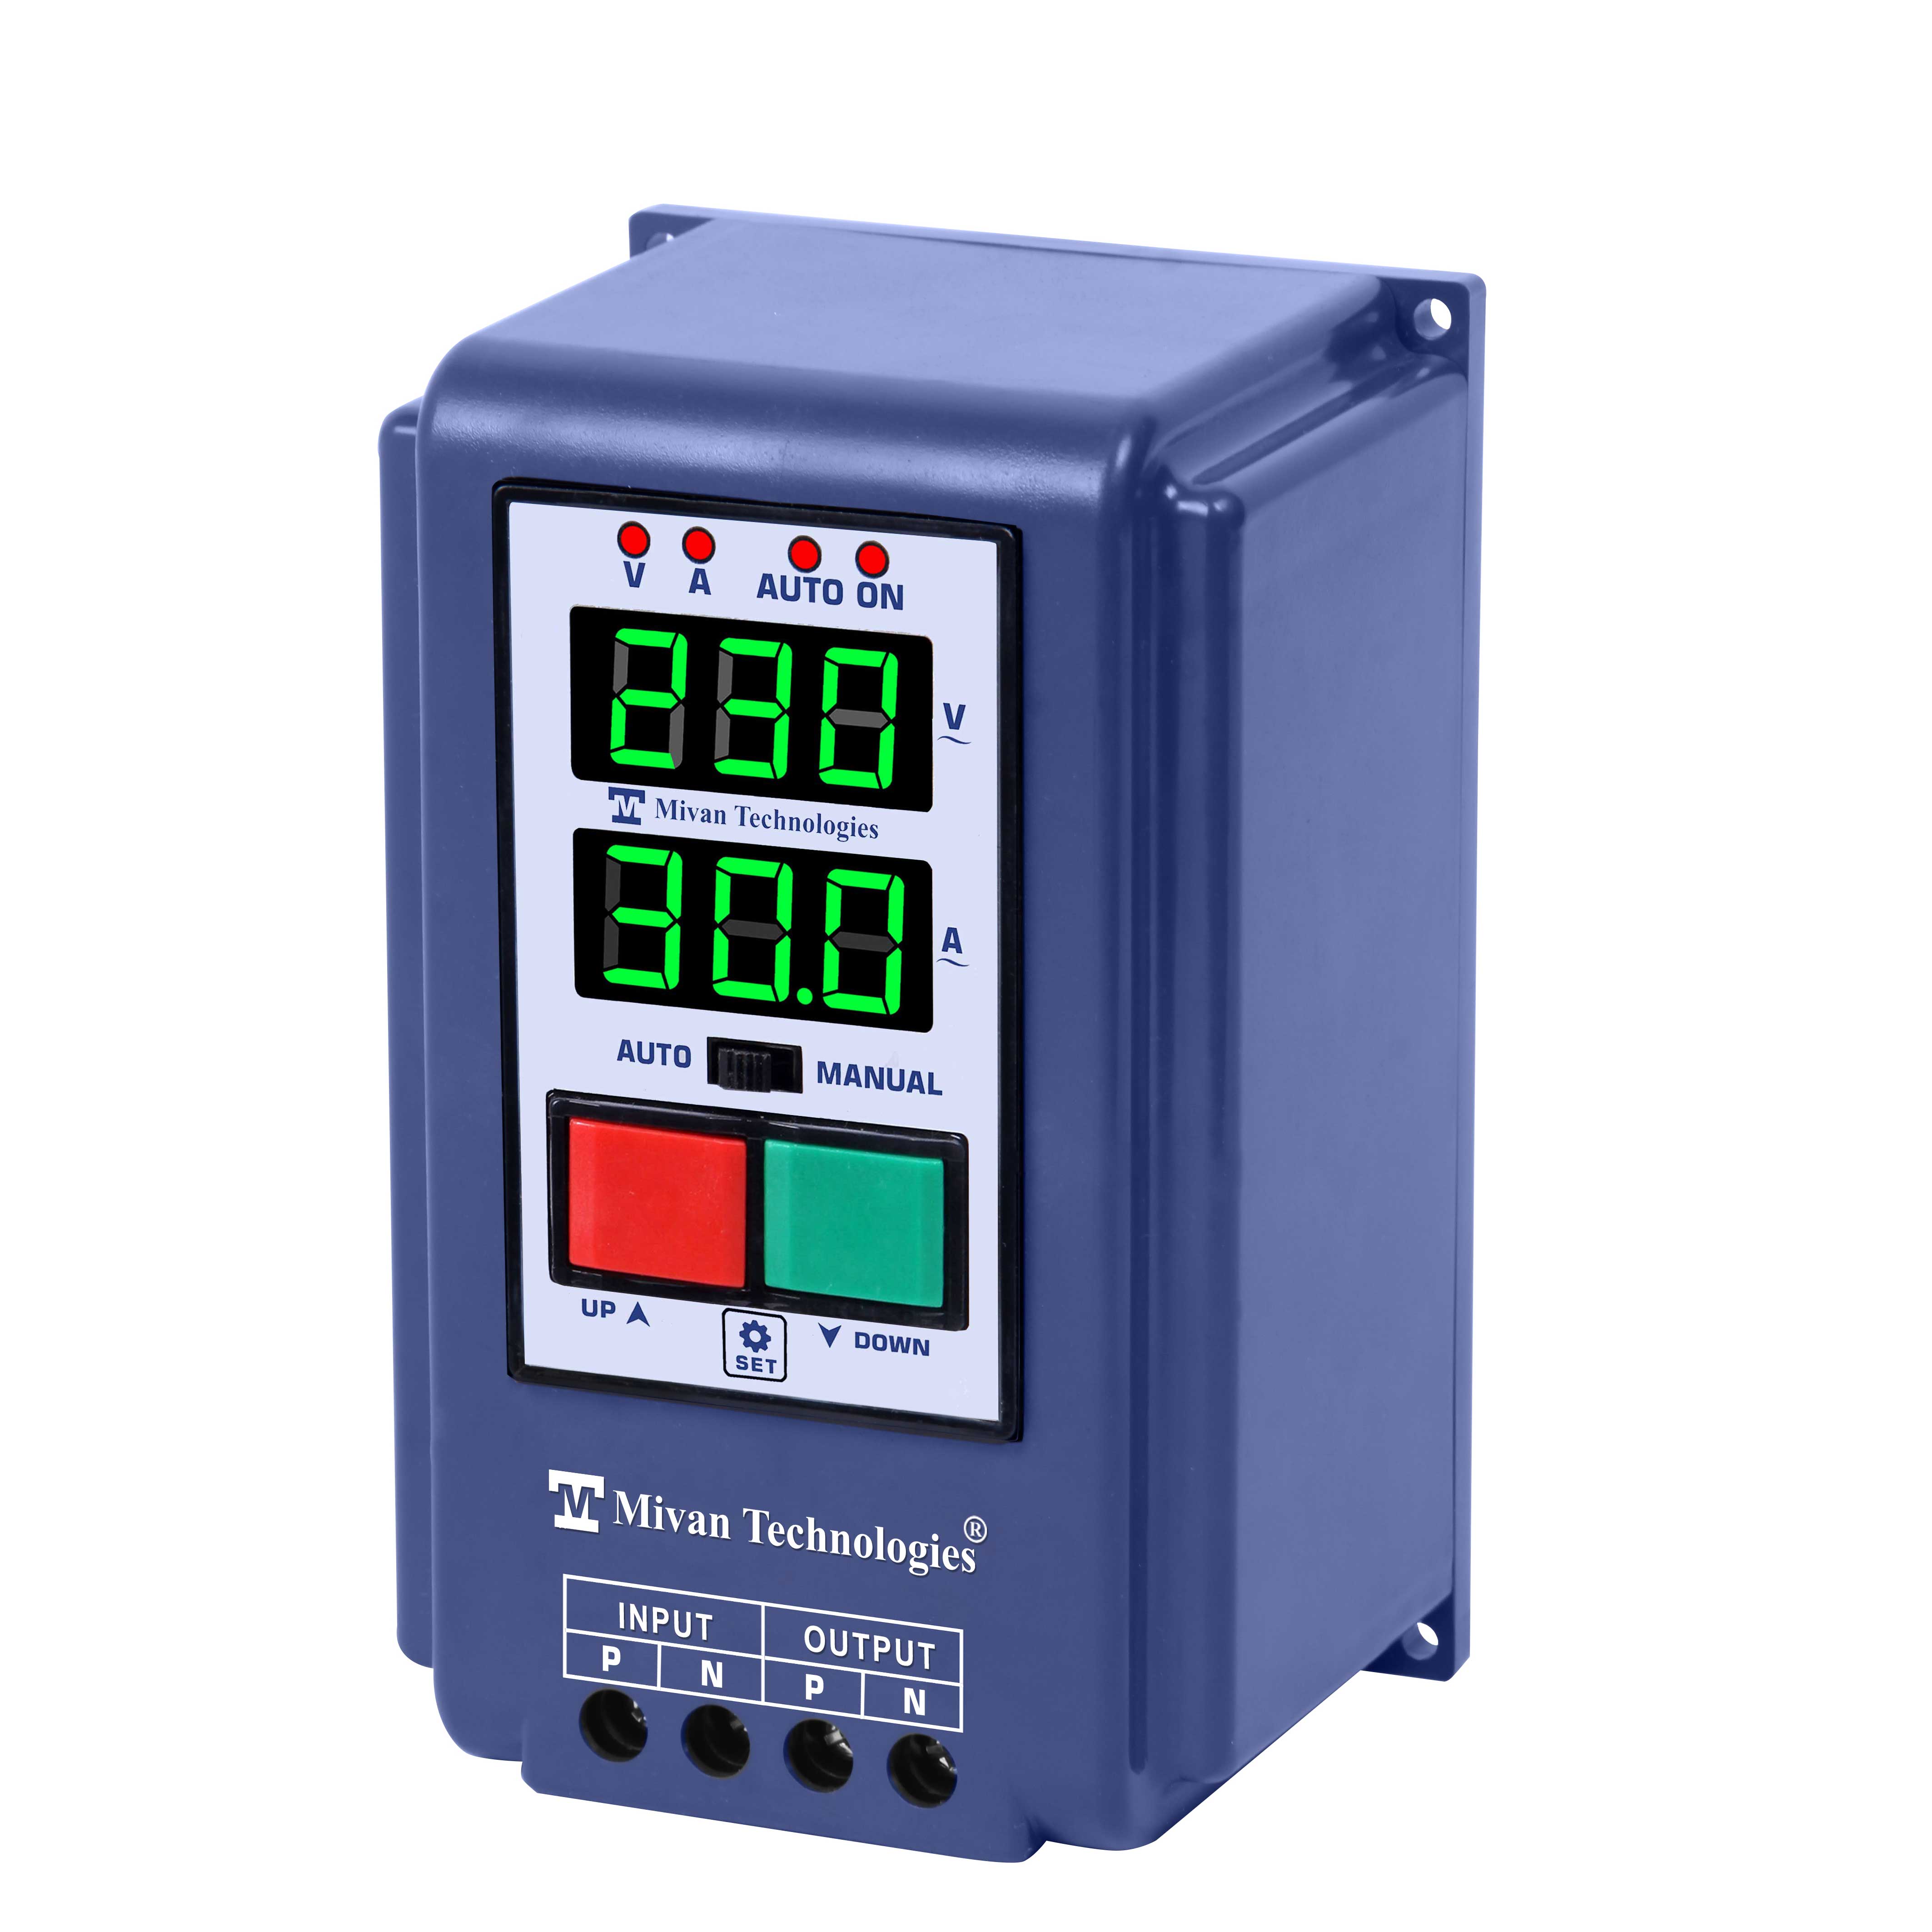 DOP HD Single Phase Digital Overload Protection relay with HV LV OL and dry run protection cyclic timer suitable for all single phase appliances Suitable up to 3 hp motor DS